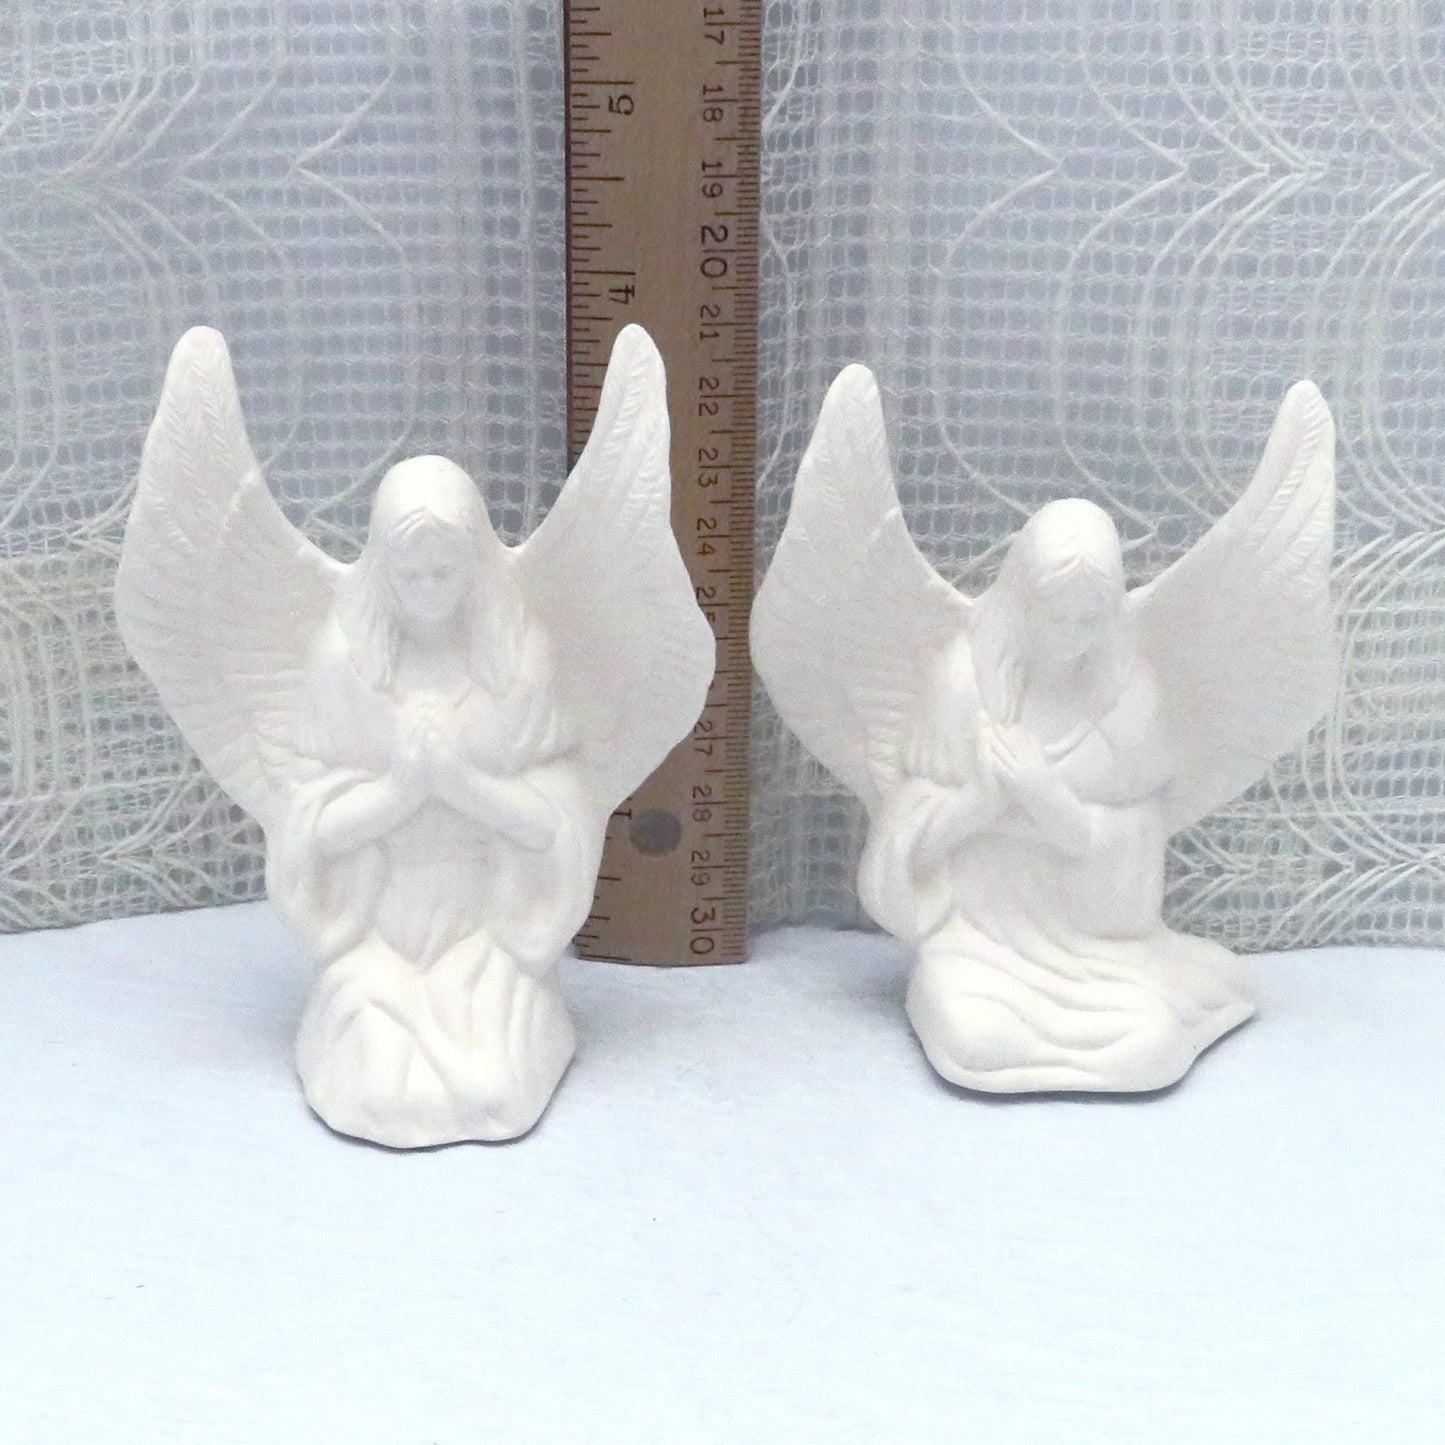 Handmade ceramic angels to paint in front of a ruler showing the tip of the wing to be almost 4 inches high.  The sitting angel is a bit shorter.